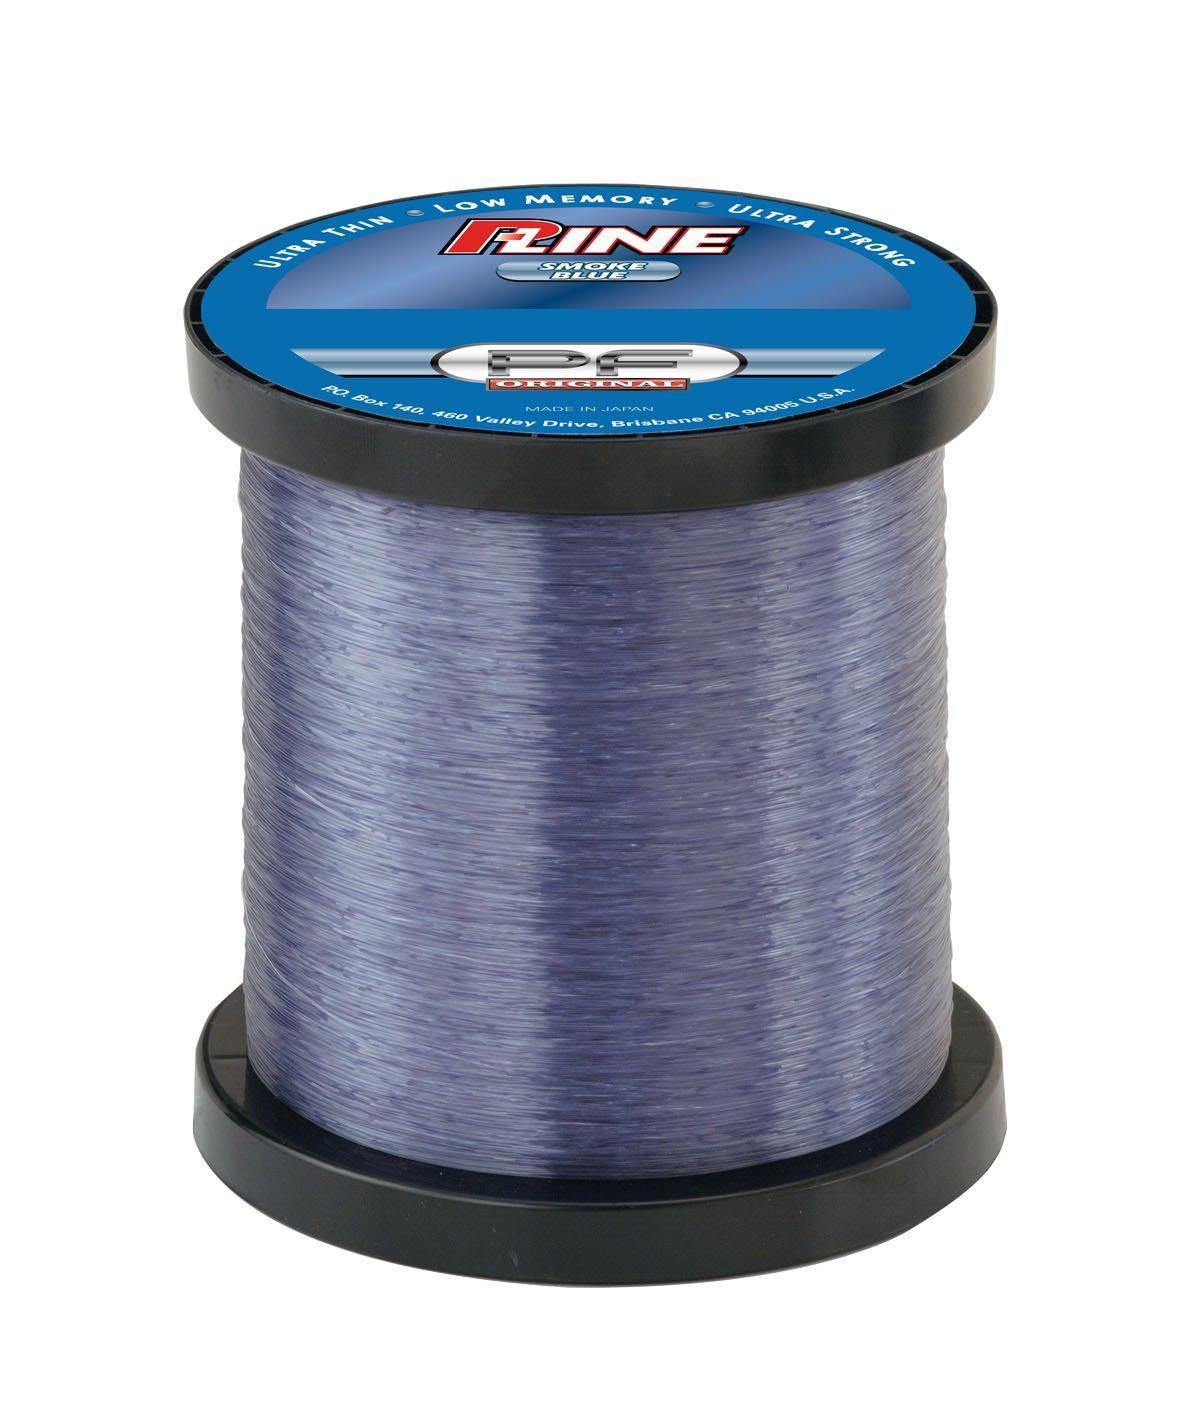 High Quality Copolymer Fishing Line Suppliers, Manufacturers